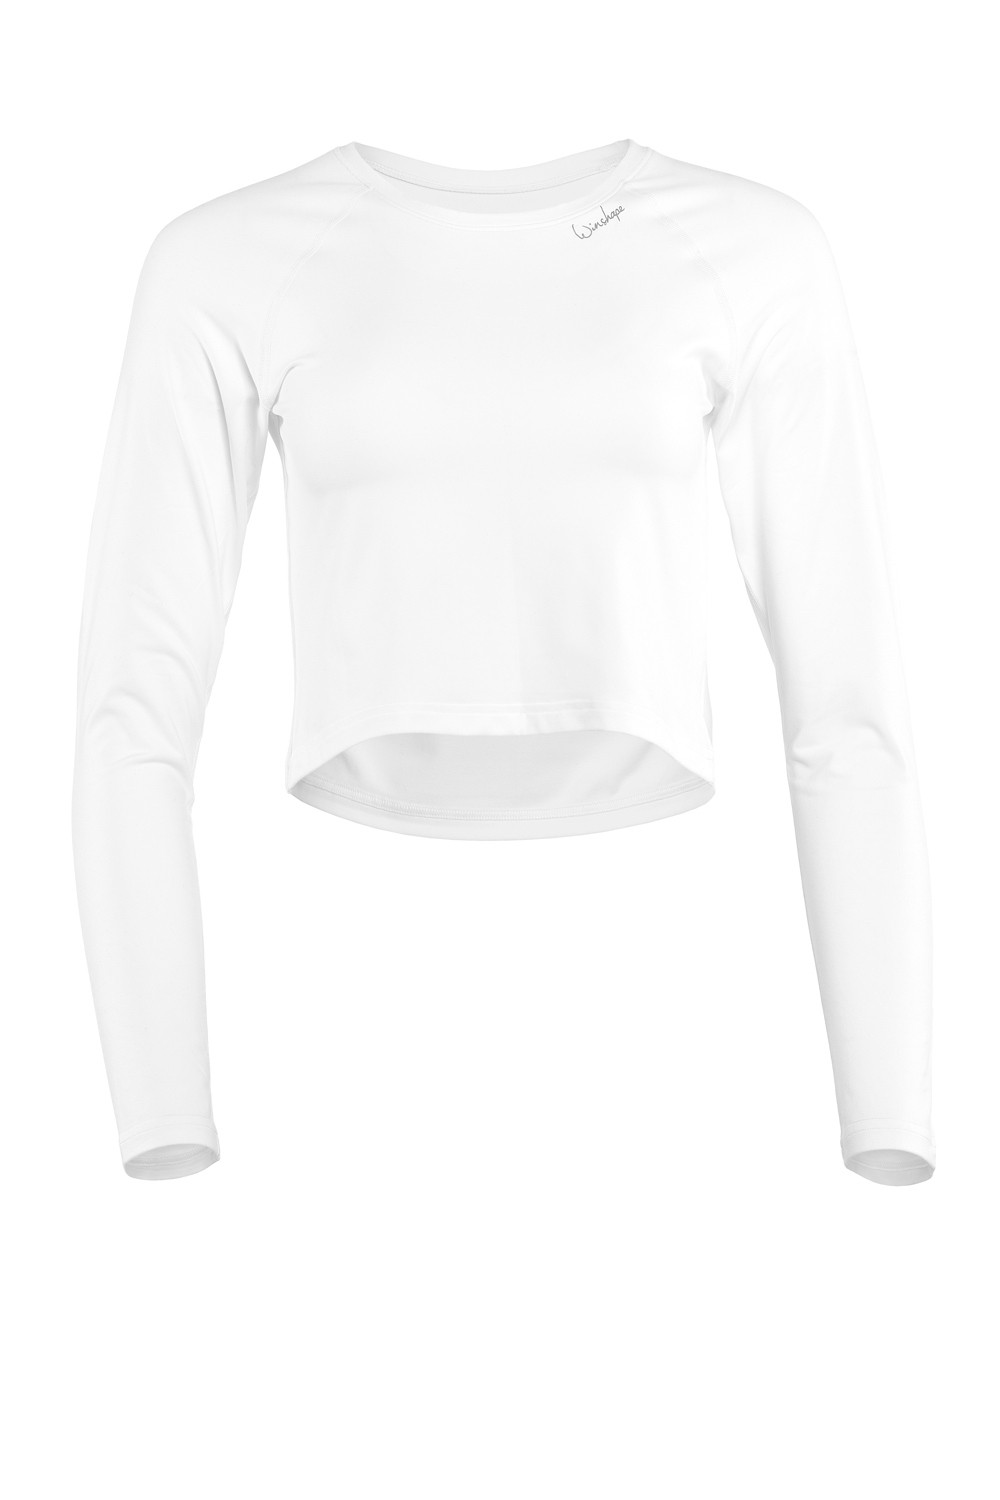 Functional Light and Cropped Soft Top Sleeve Long Ultra Soft Winshape Style ivory, AET116LS